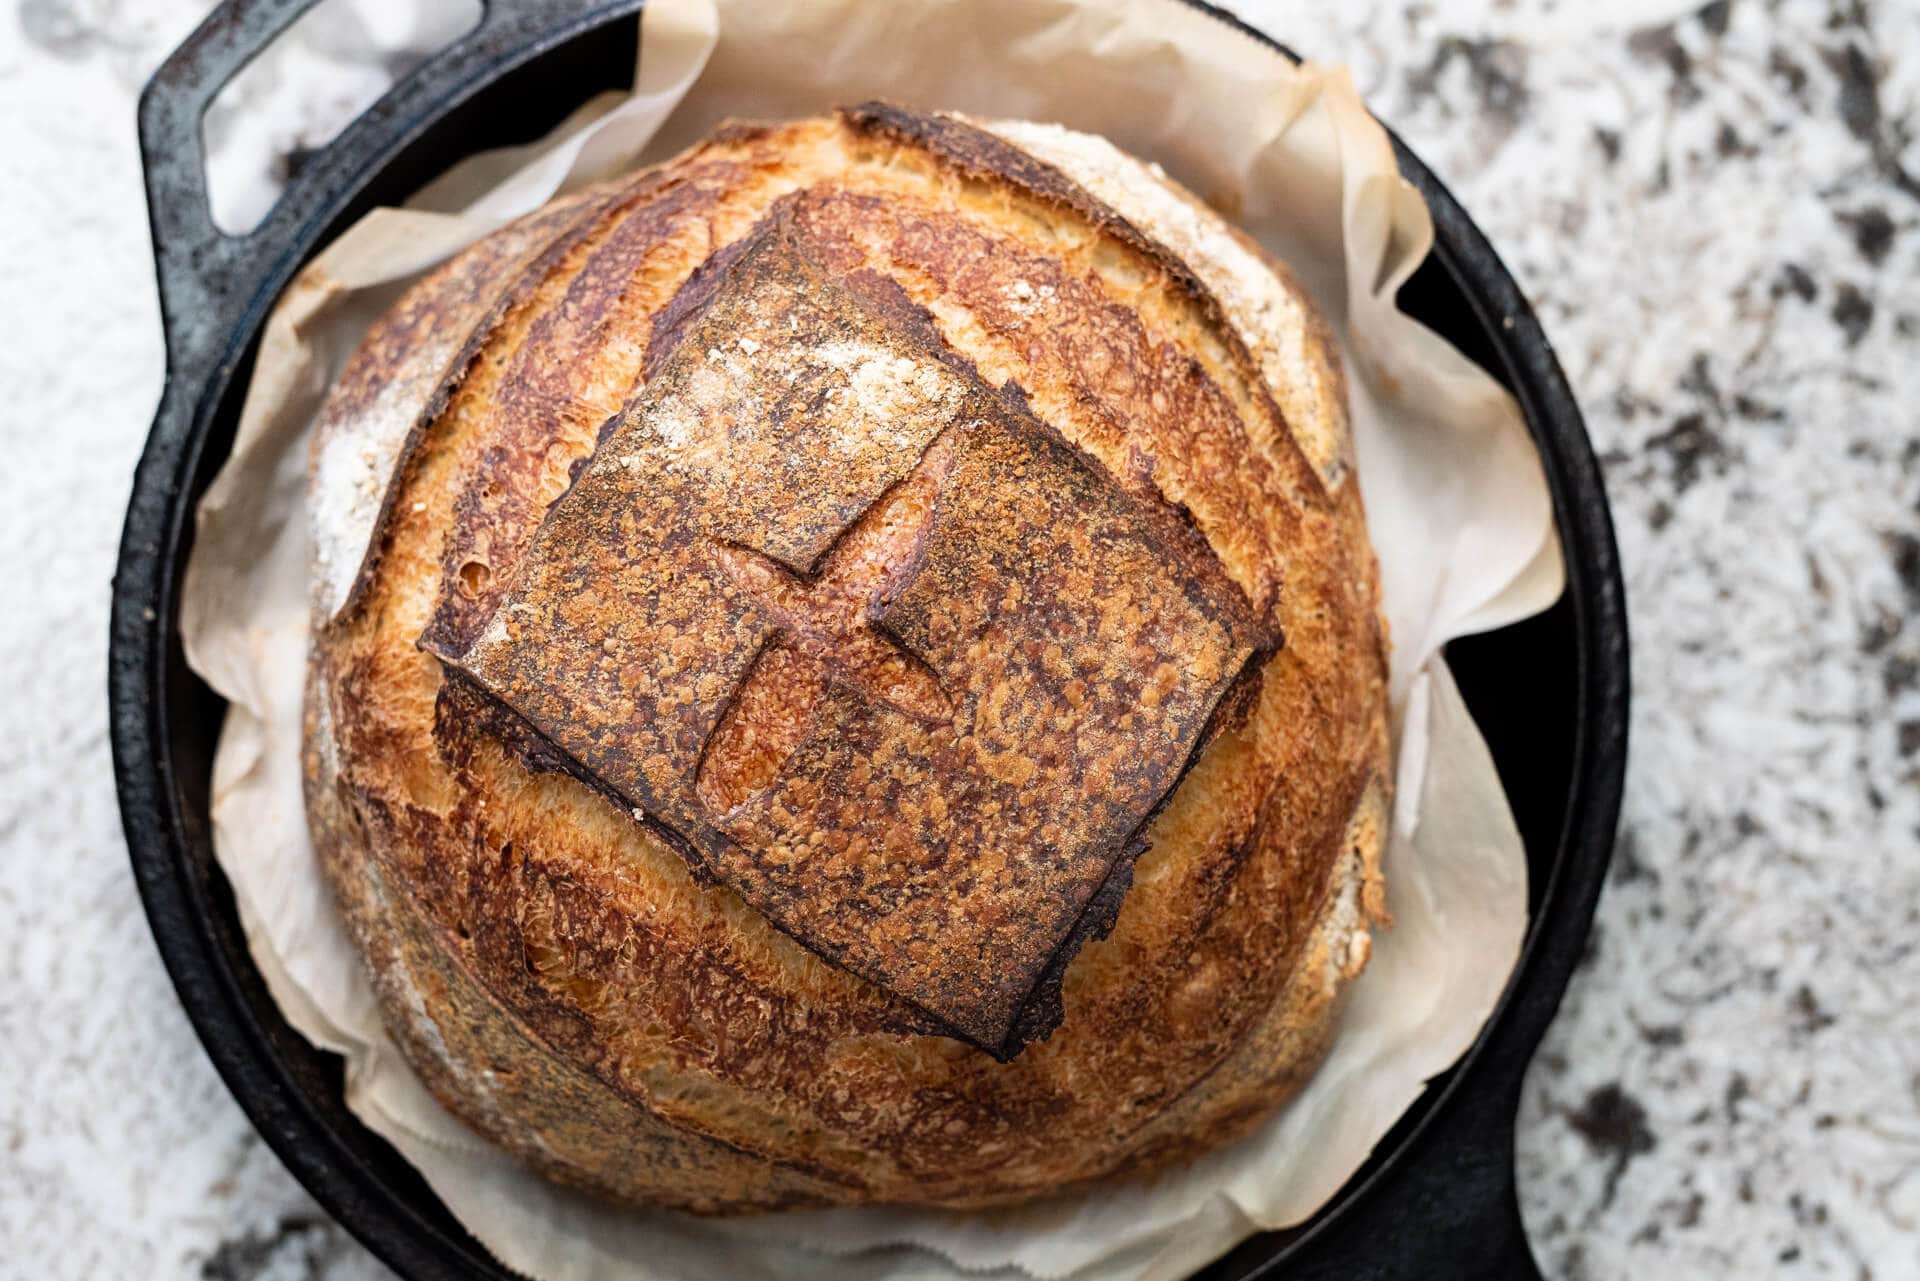 theperfectloaf-baking-bread-in-a-dutch-oven-feature-100